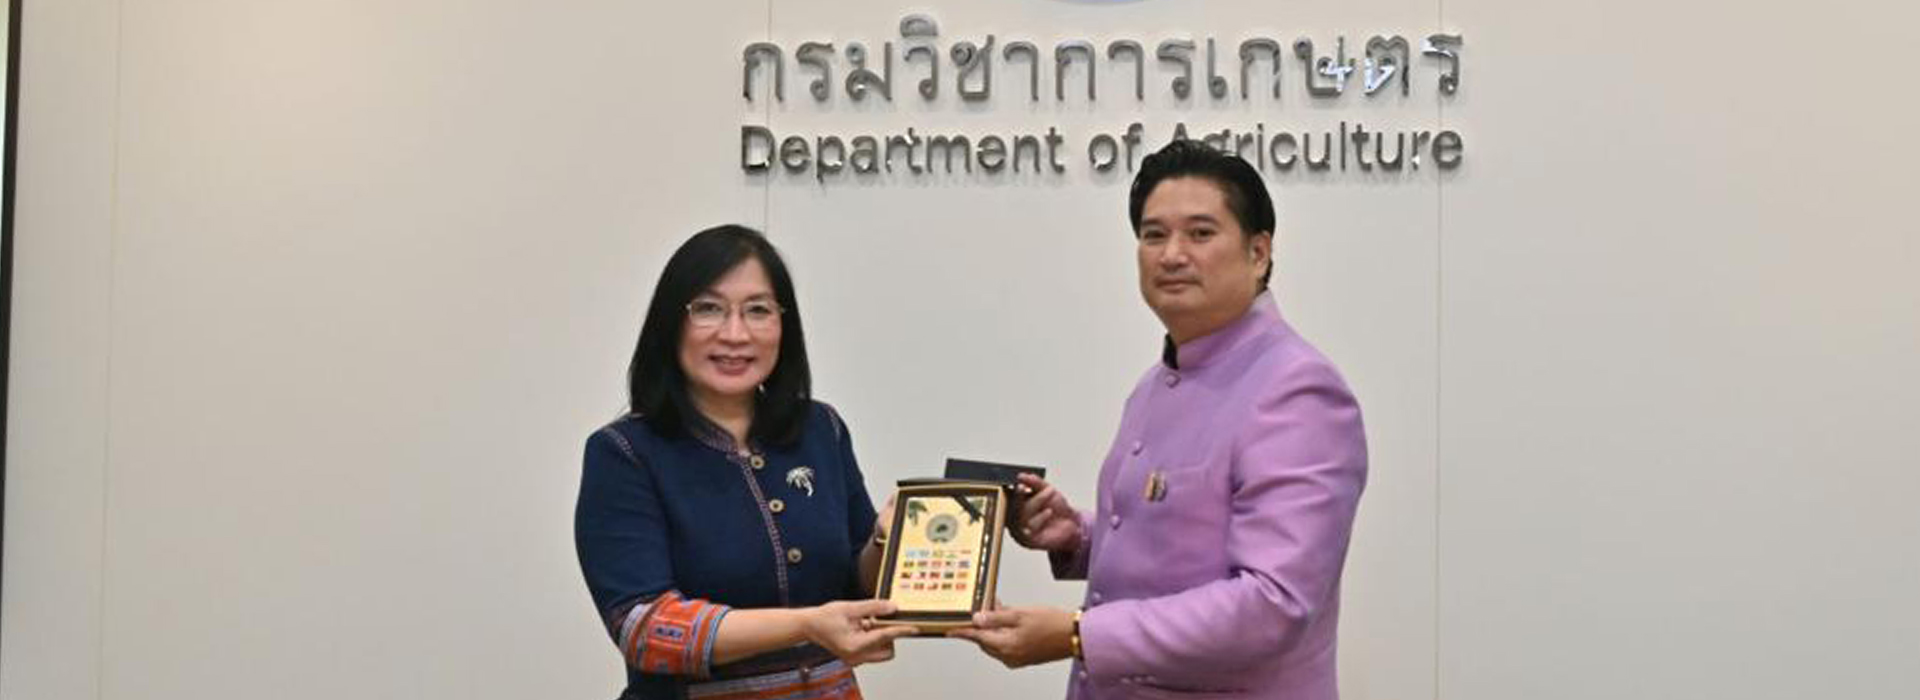 a-fruitful-visit-to-the-ministry-of-agriculture-and-cooperative-government-of-thailand20230502093709.jpg